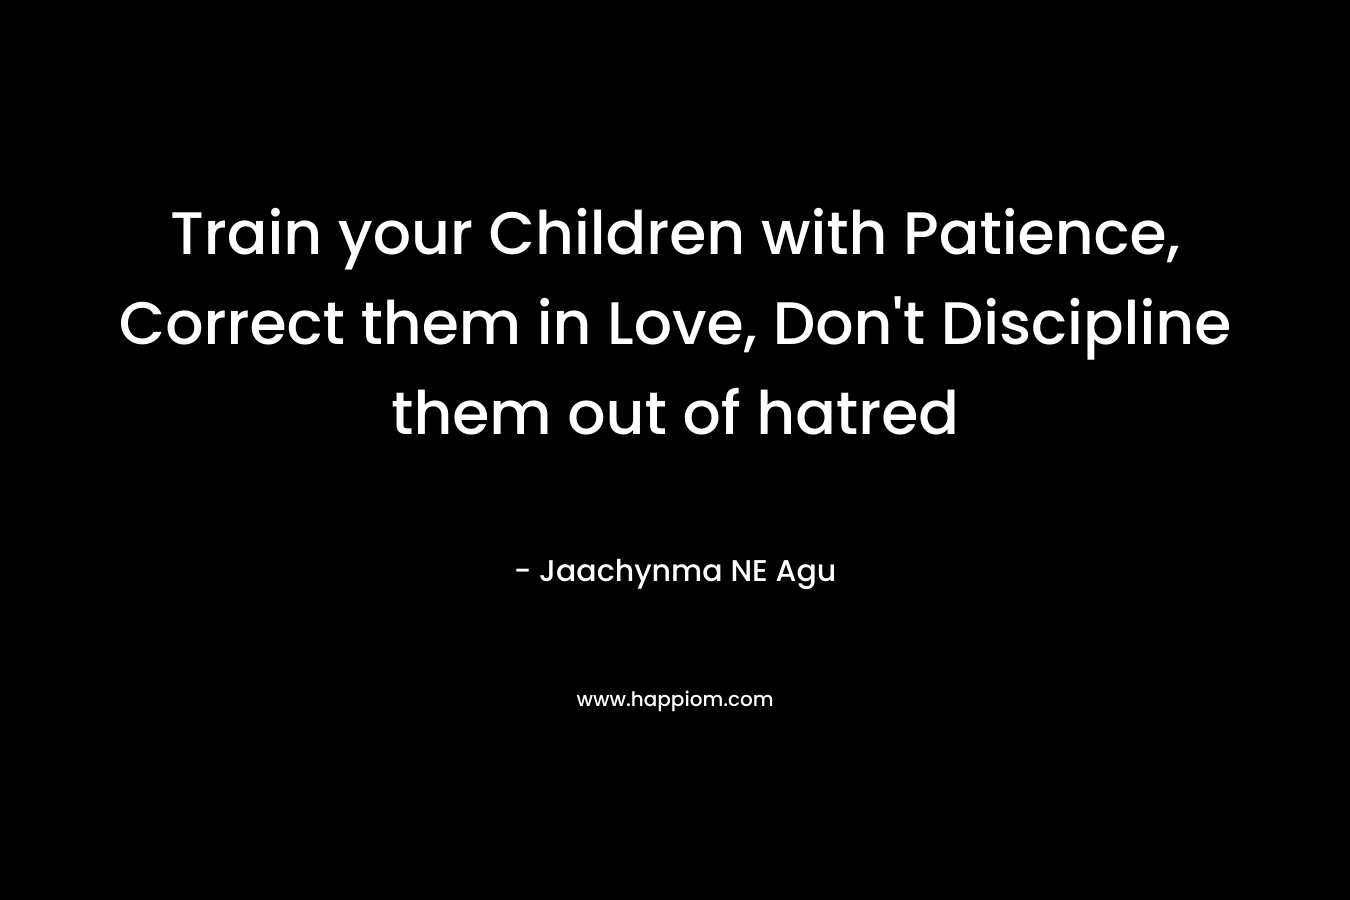 Train your Children with Patience, Correct them in Love, Don't Discipline them out of hatred